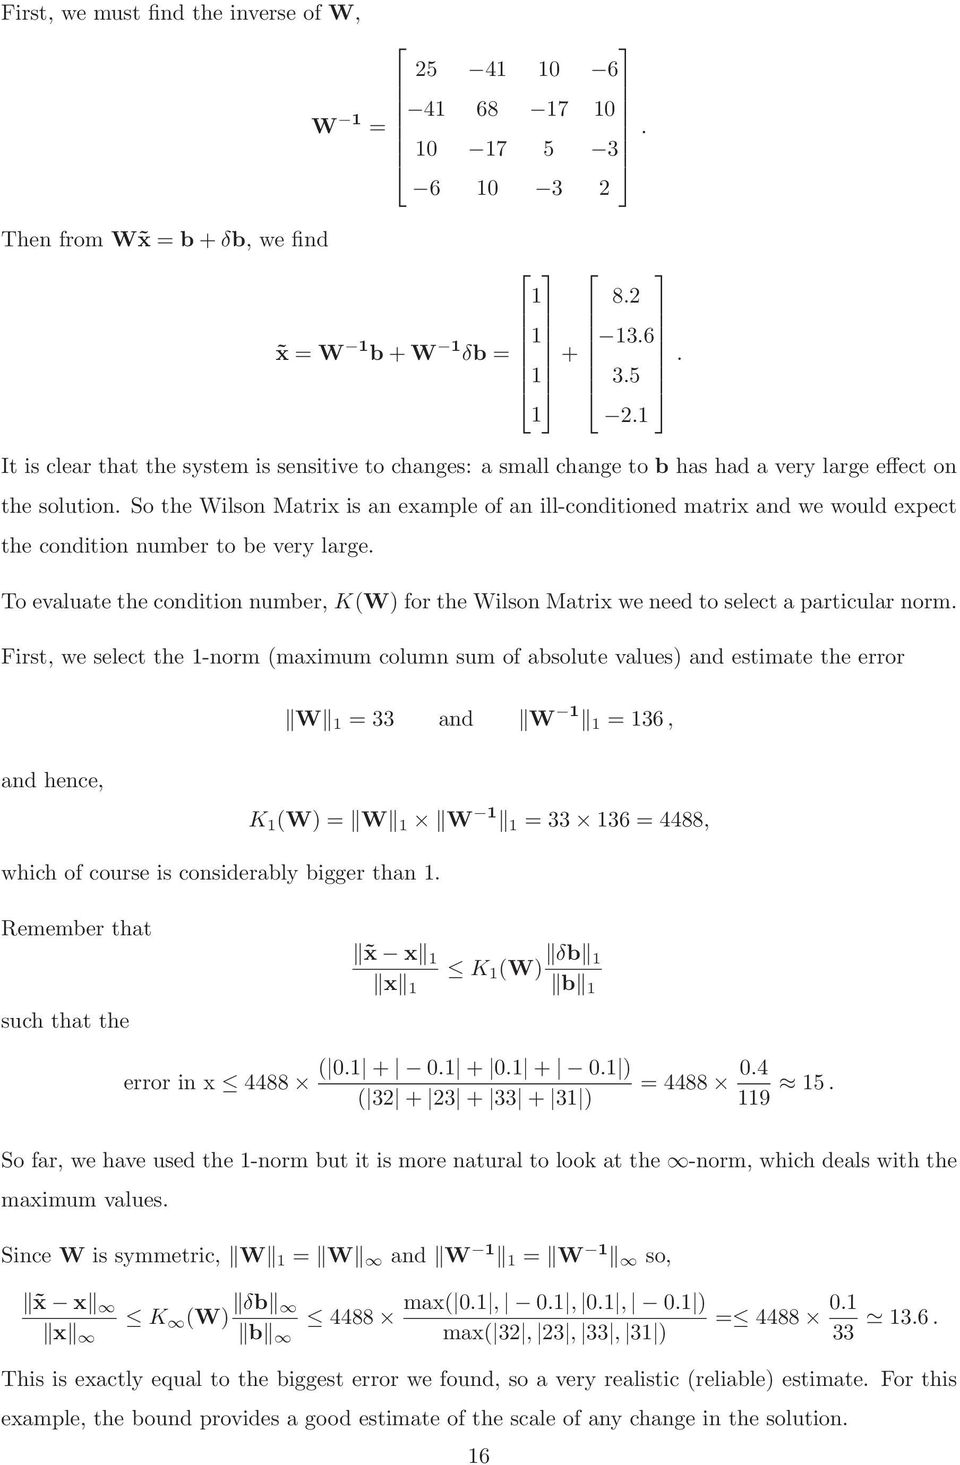 very large To evaluate the condition number, K(W) for the Wilson Matrix we need to select a particular norm First, we select the 1-norm (maximum column sum of absolute values) and estimate the error